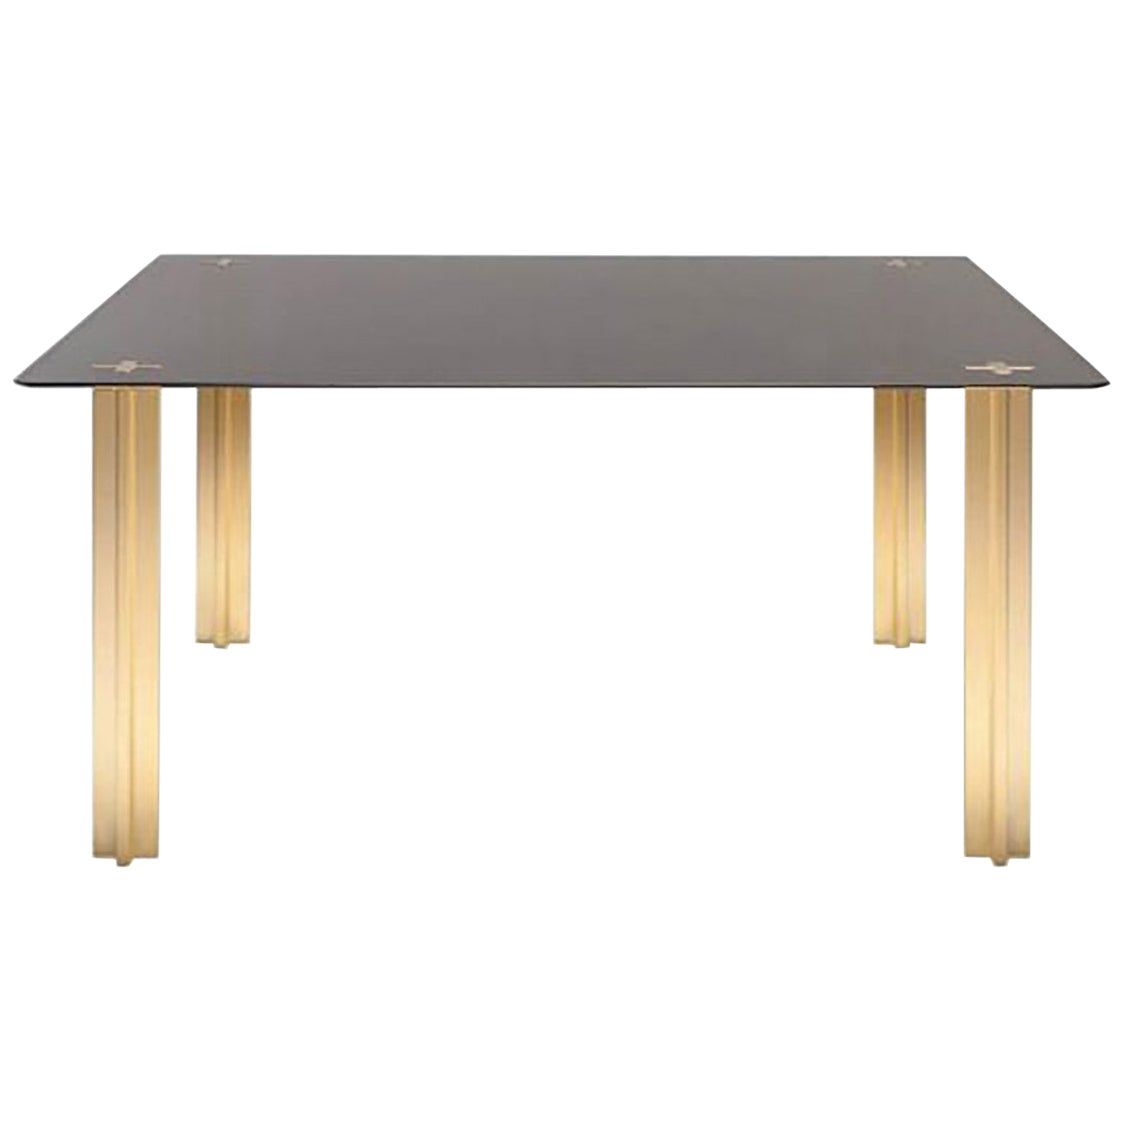 Gold Contemporary Square Table, Smoke Glass Top And Gold Plated Throughout Glass And Gold Rectangular Desks (View 8 of 15)